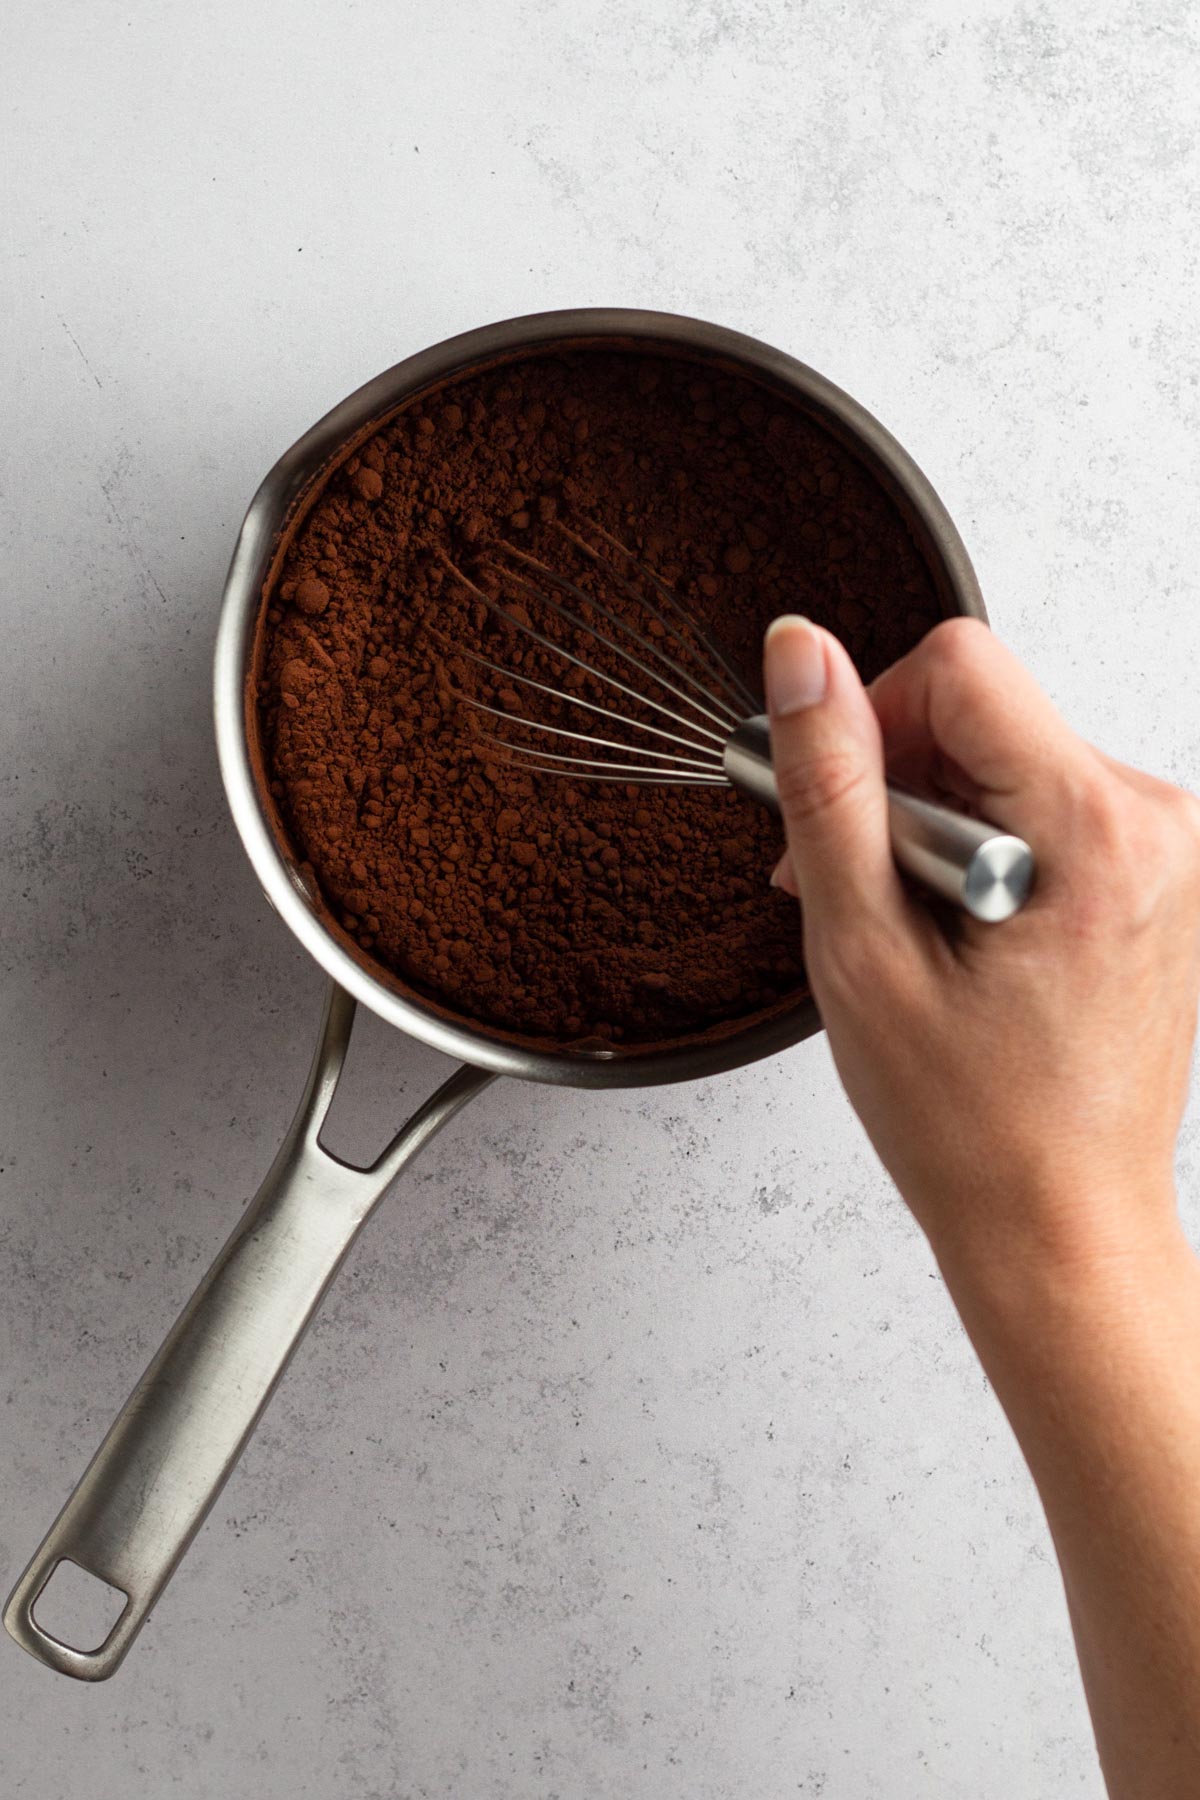 Milk, sugar, and cocoa being whisked together in a saucepan.